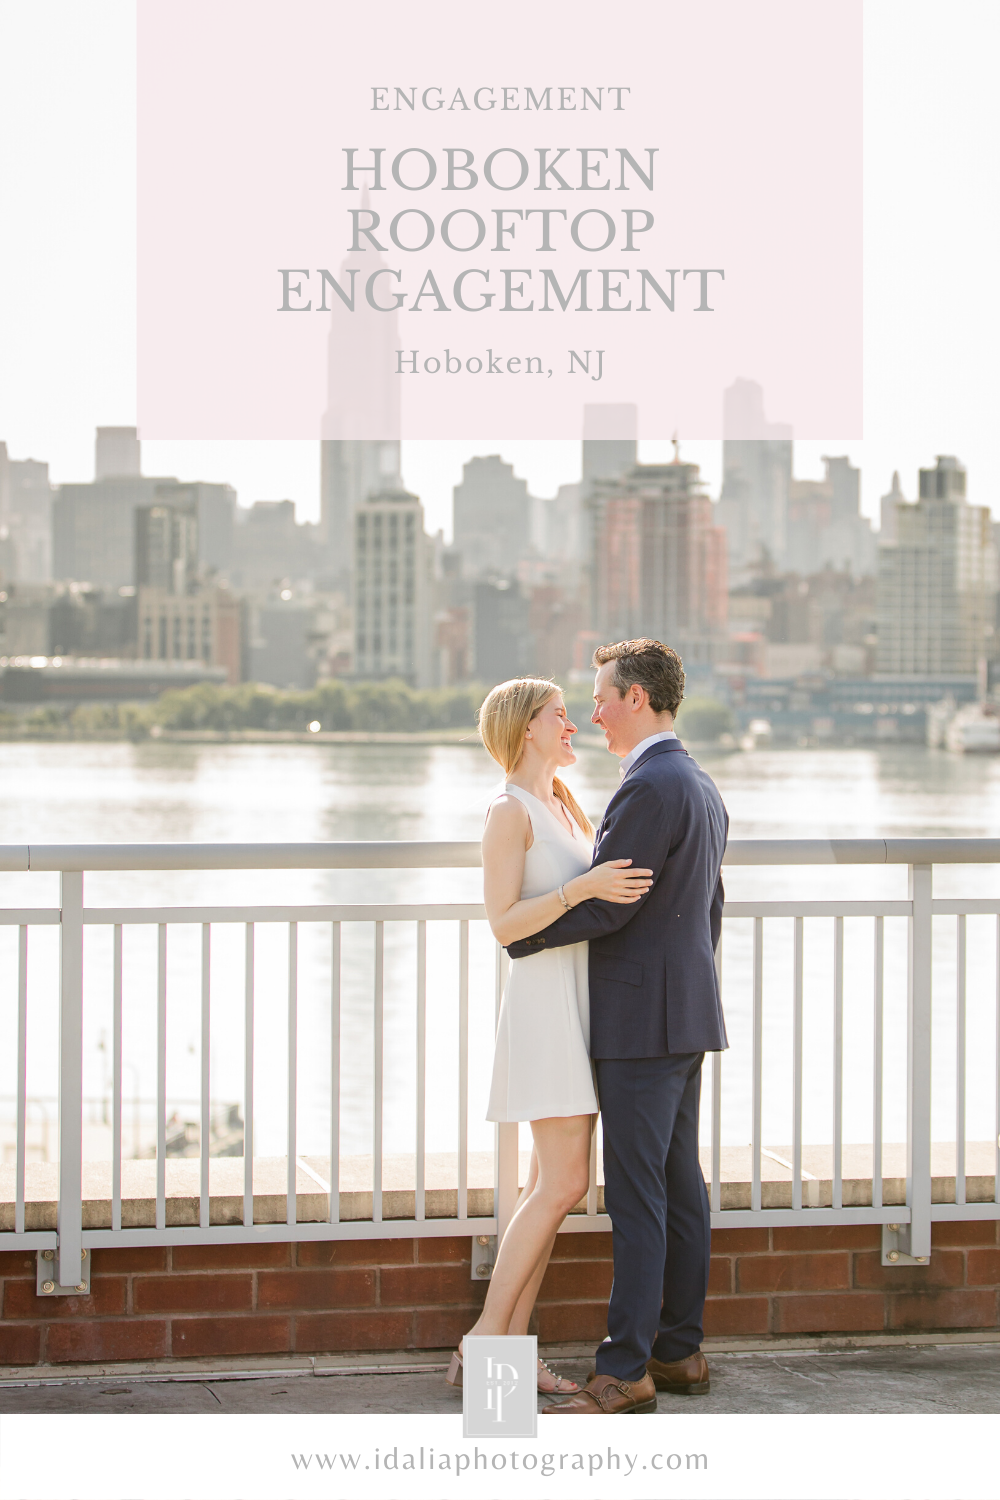 Hoboken rooftop engagement session by Idalia Photography